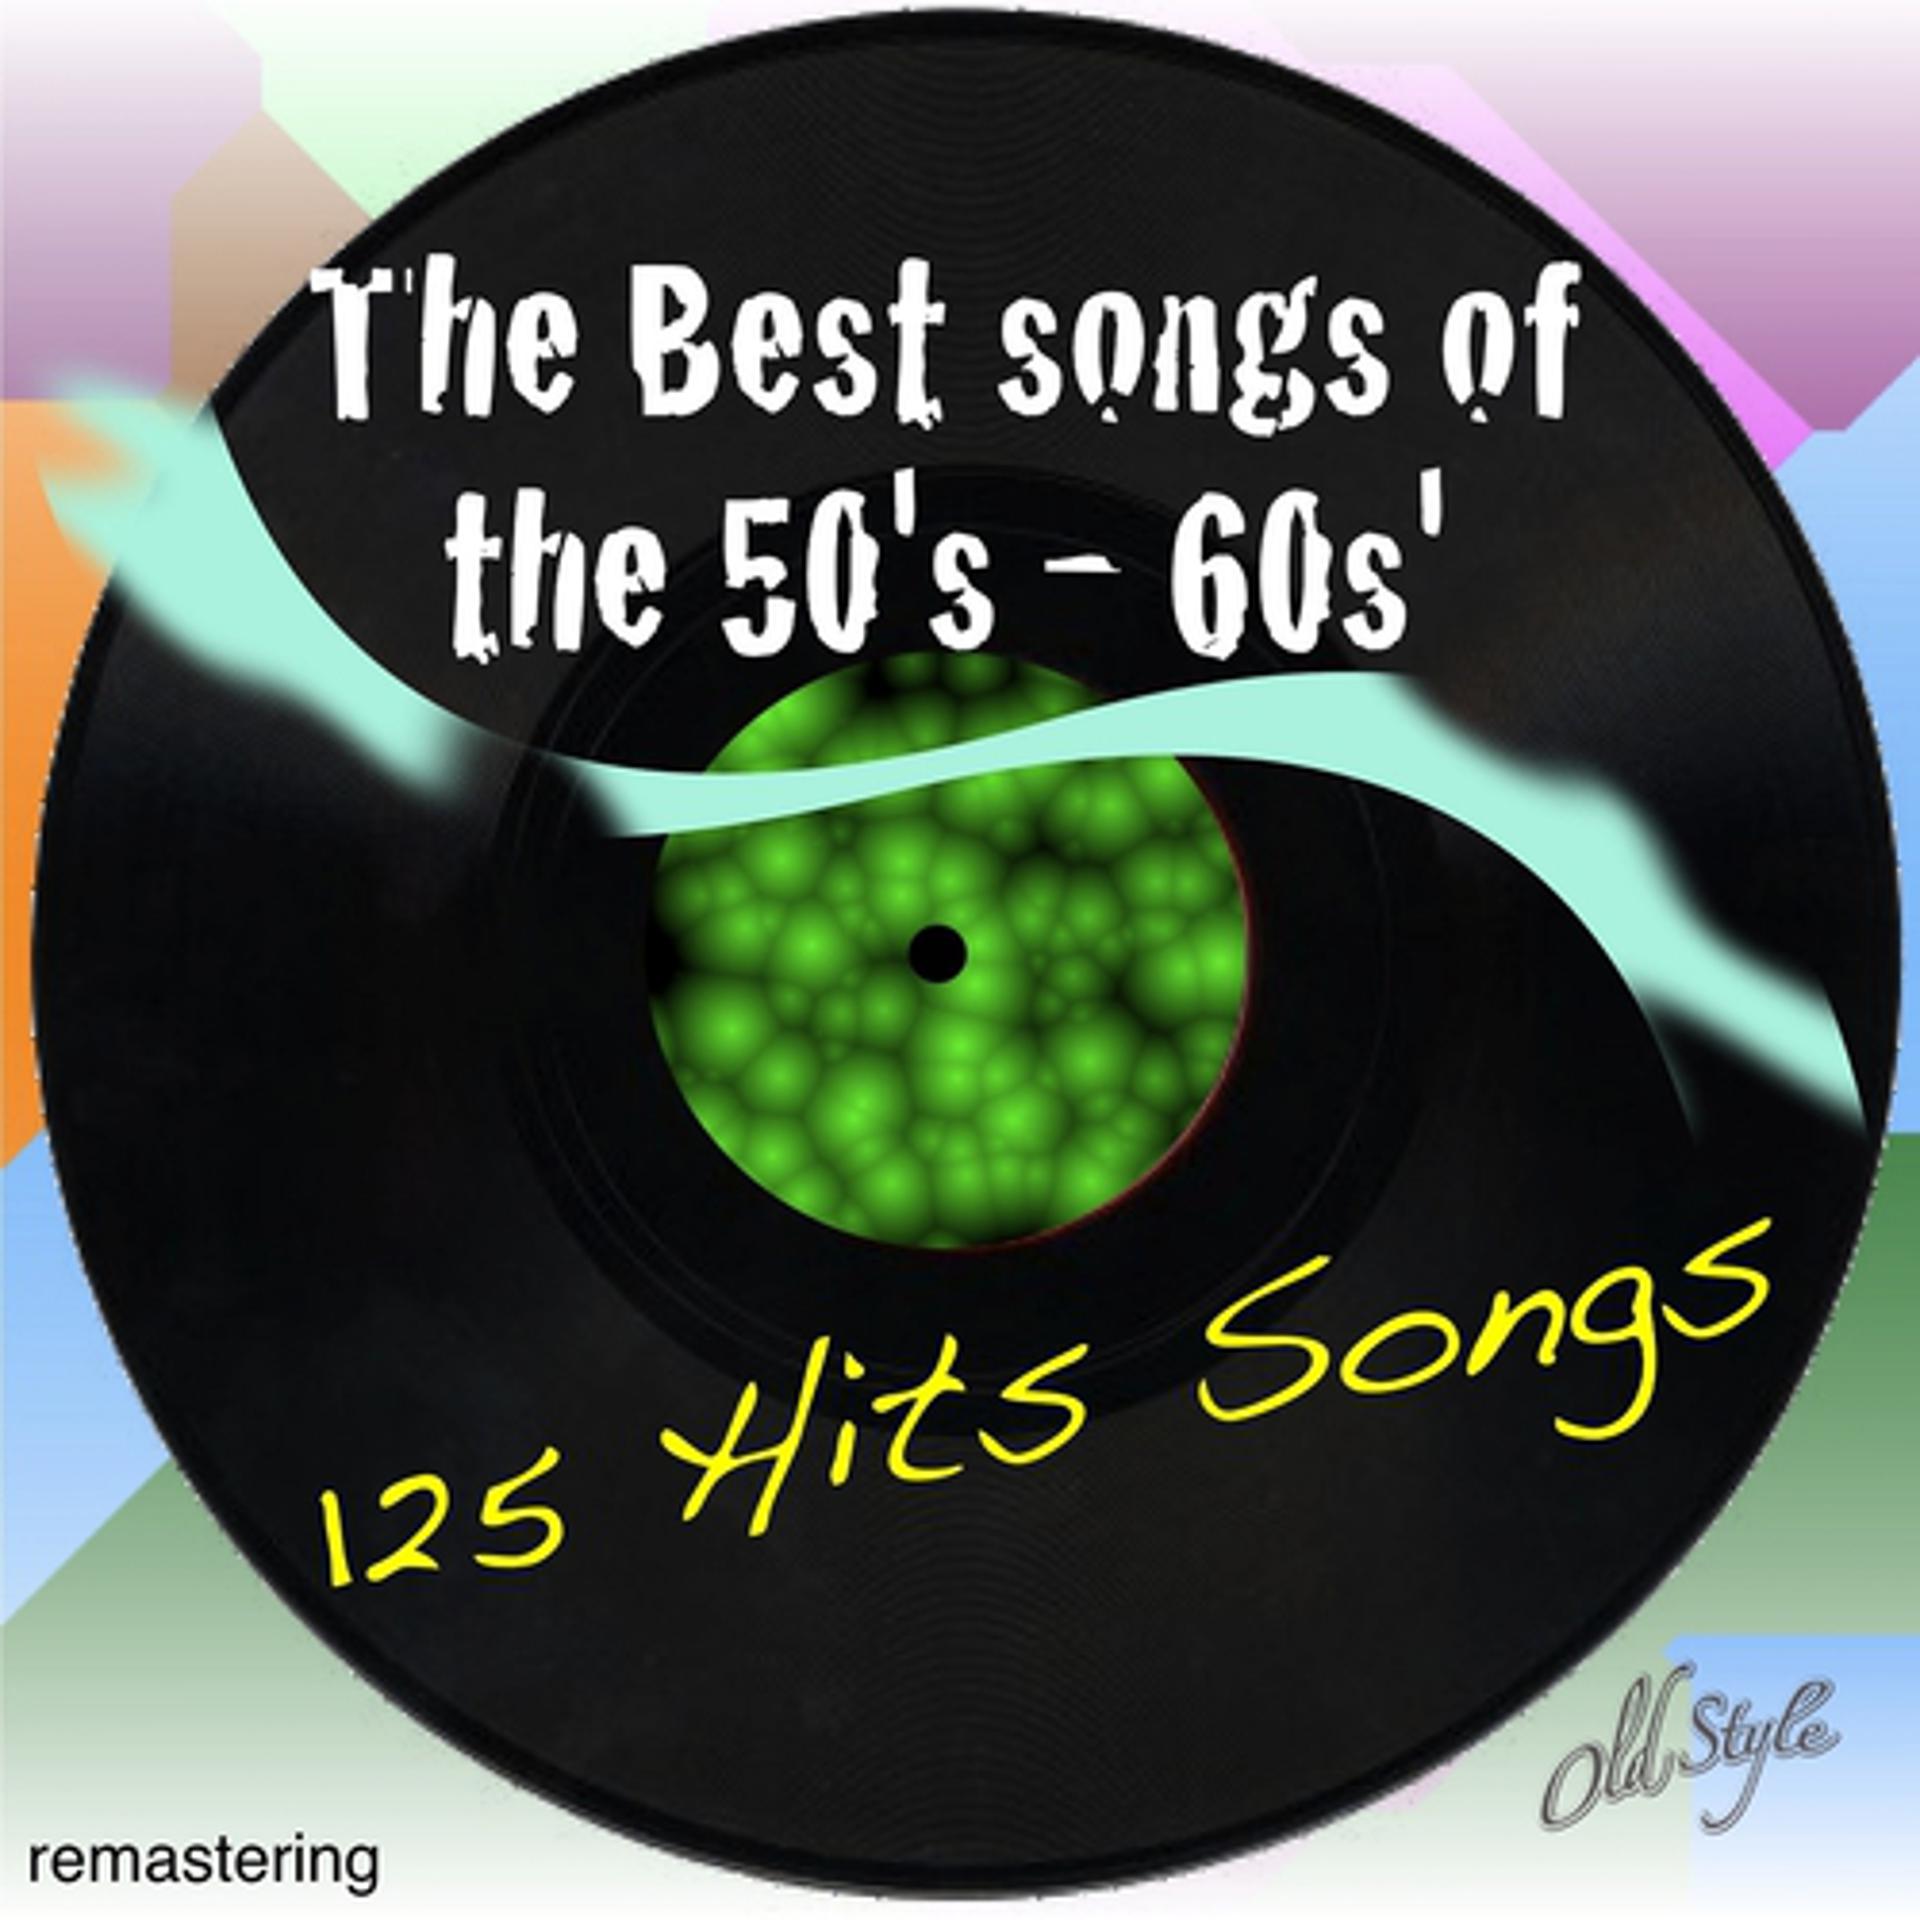 Постер альбома The Best Songs of the 50's - 60s' (125 Hits Songs - Remastering)